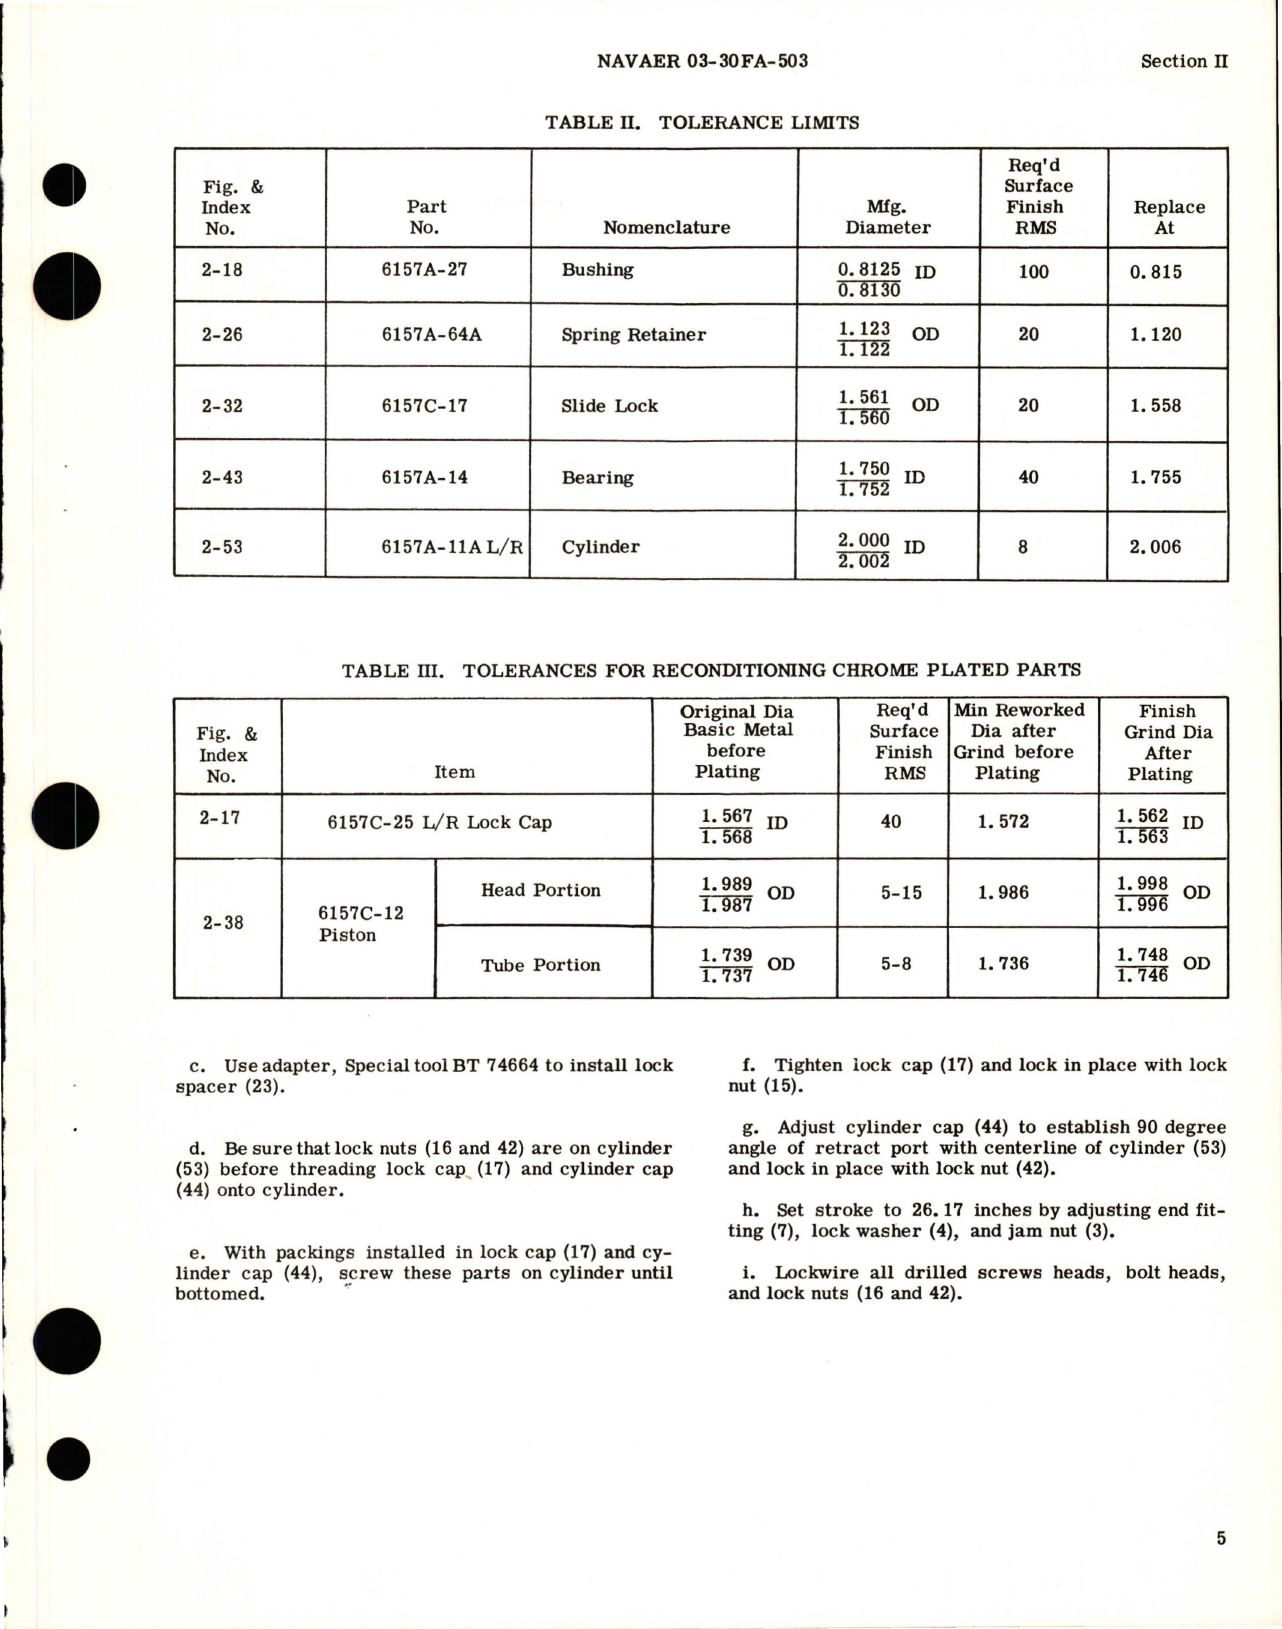 Sample page 7 from AirCorps Library document: Overhaul Instructions for Main Landing Gear Hydraulic Actuator Assembly - Parts 6157C, 6157D, 6157E, and 6157F